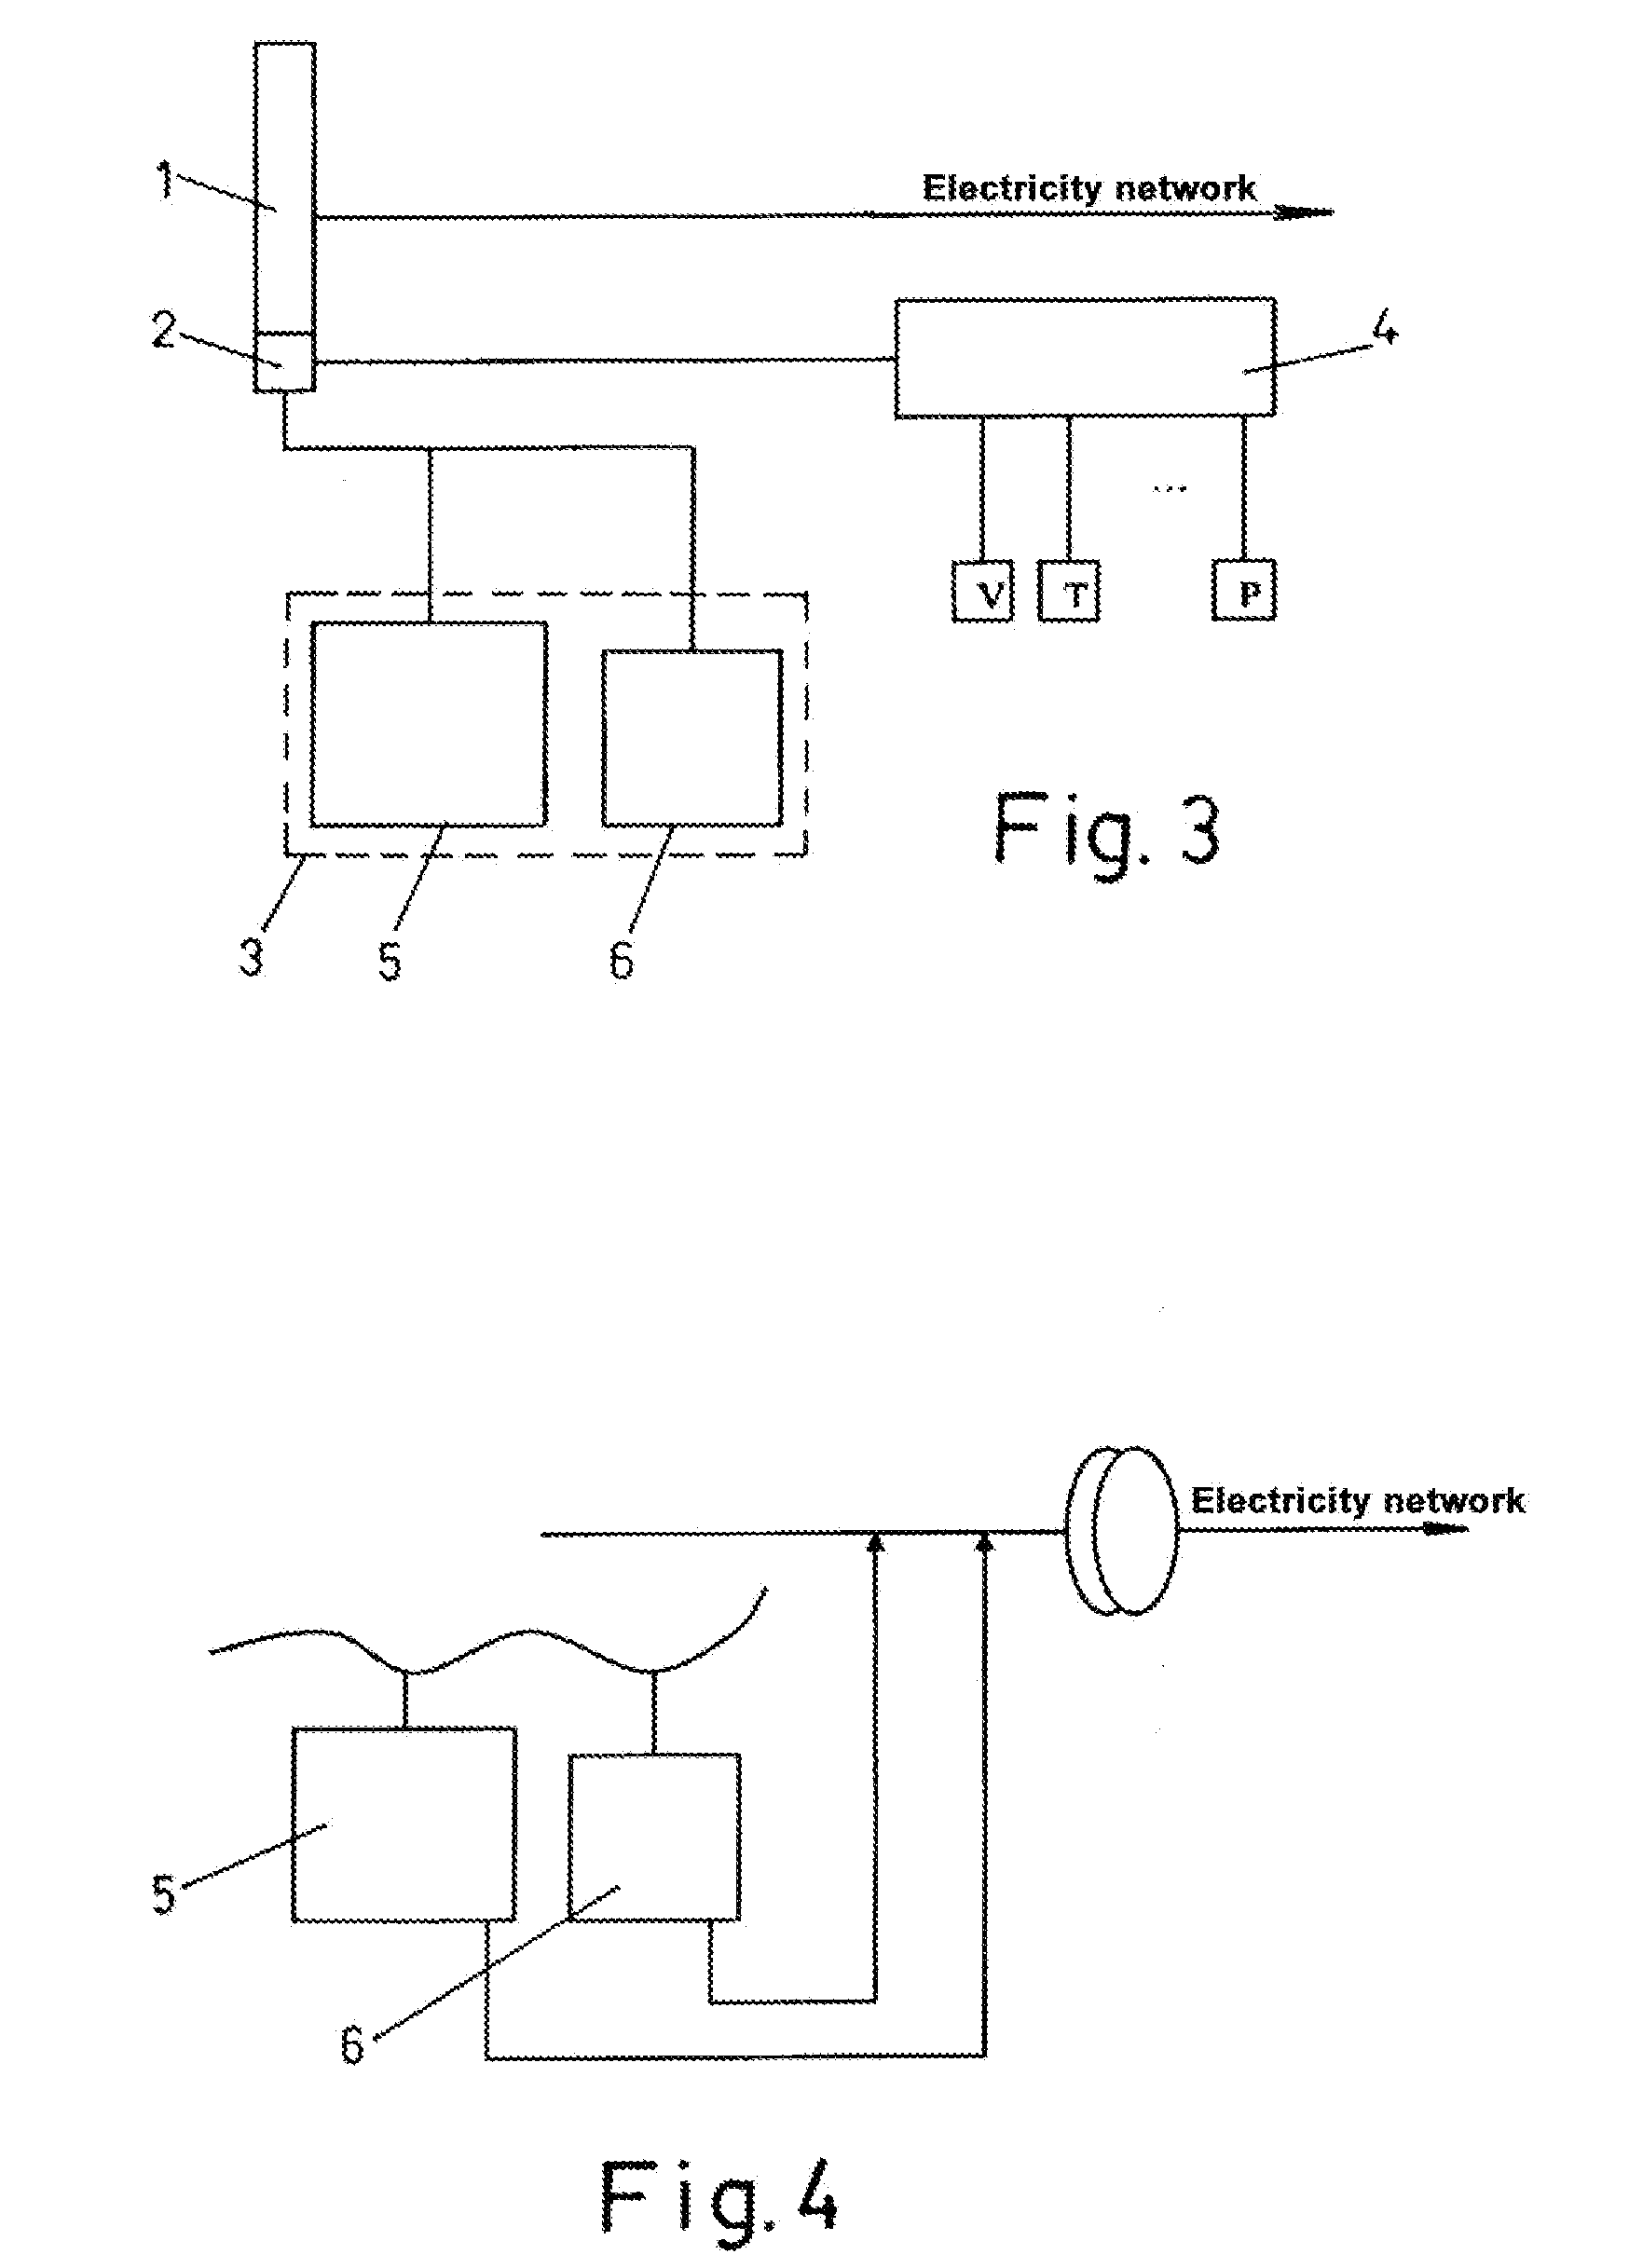 Production system for electric energy and hydrogen